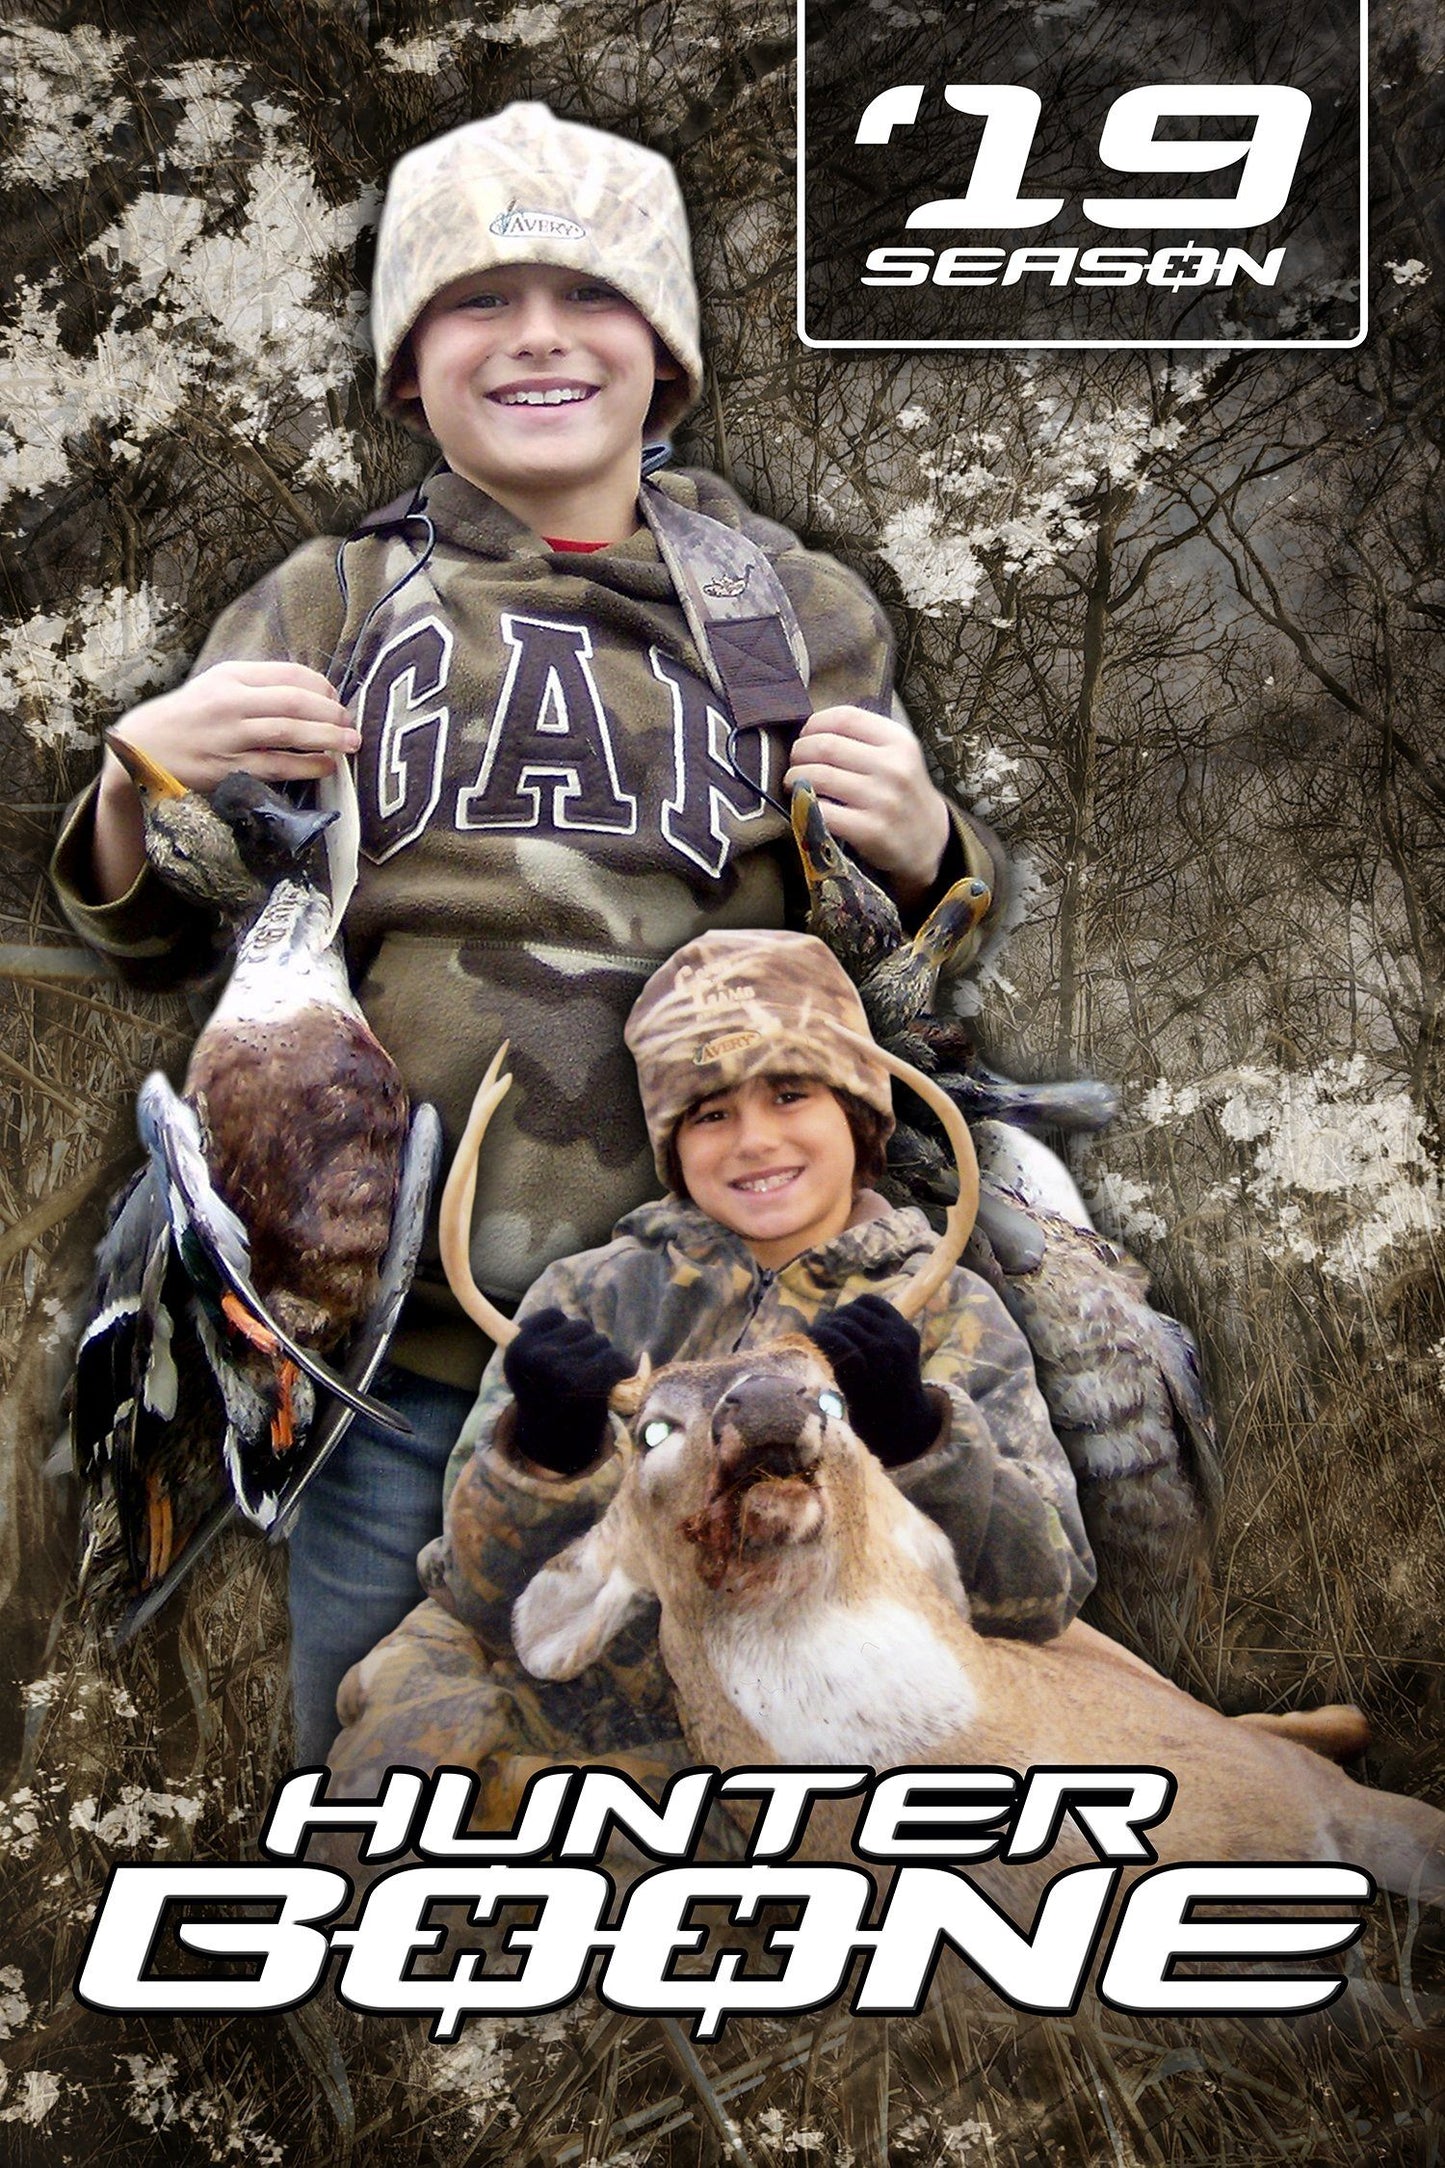 Hunting v.2 - Action Extraction Poster/Banner-Photoshop Template - Photo Solutions